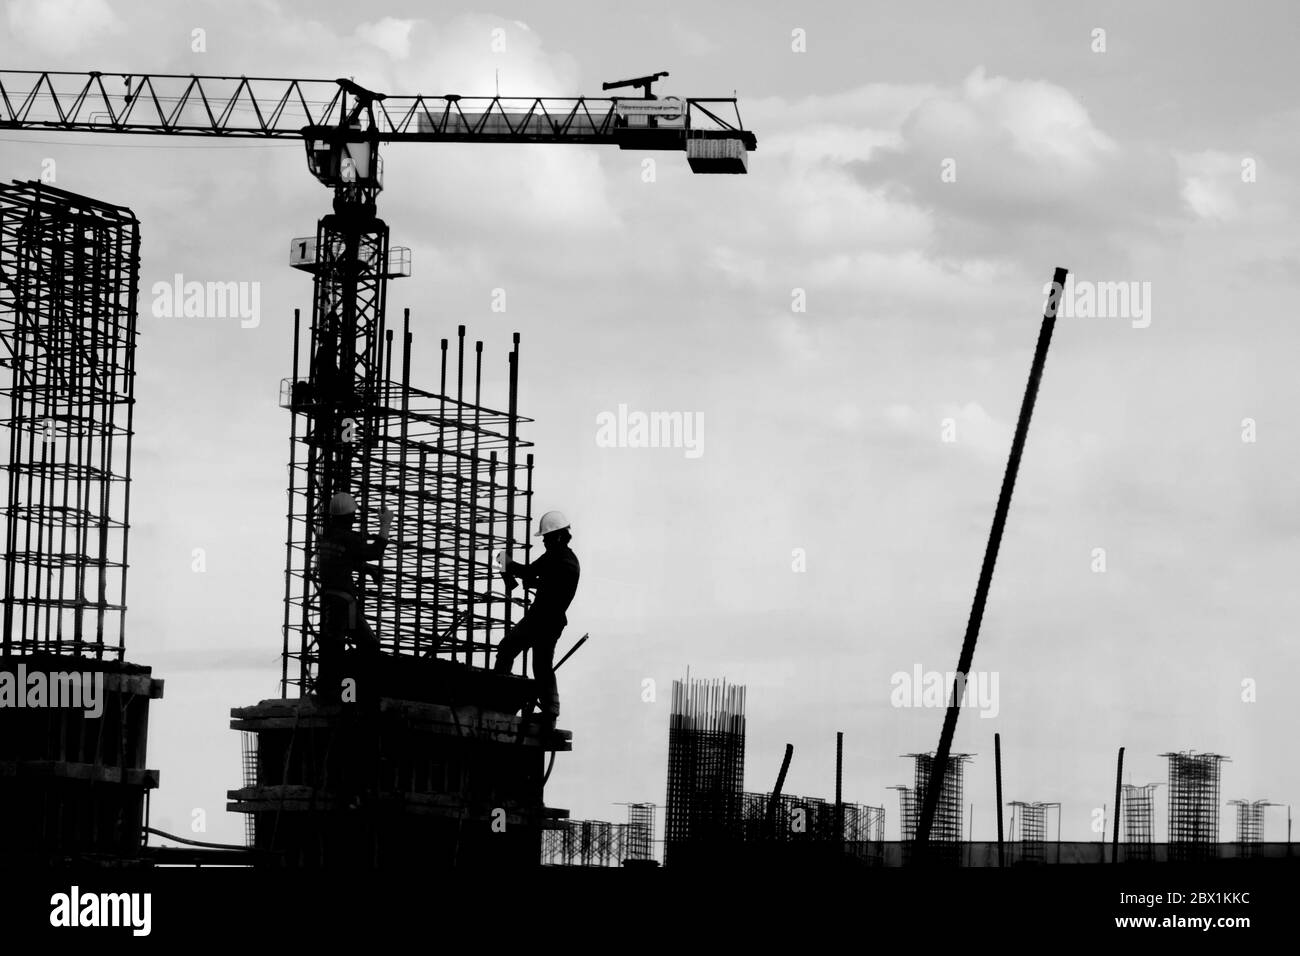 The building construction site silhouettes Stock Photo - Alamy